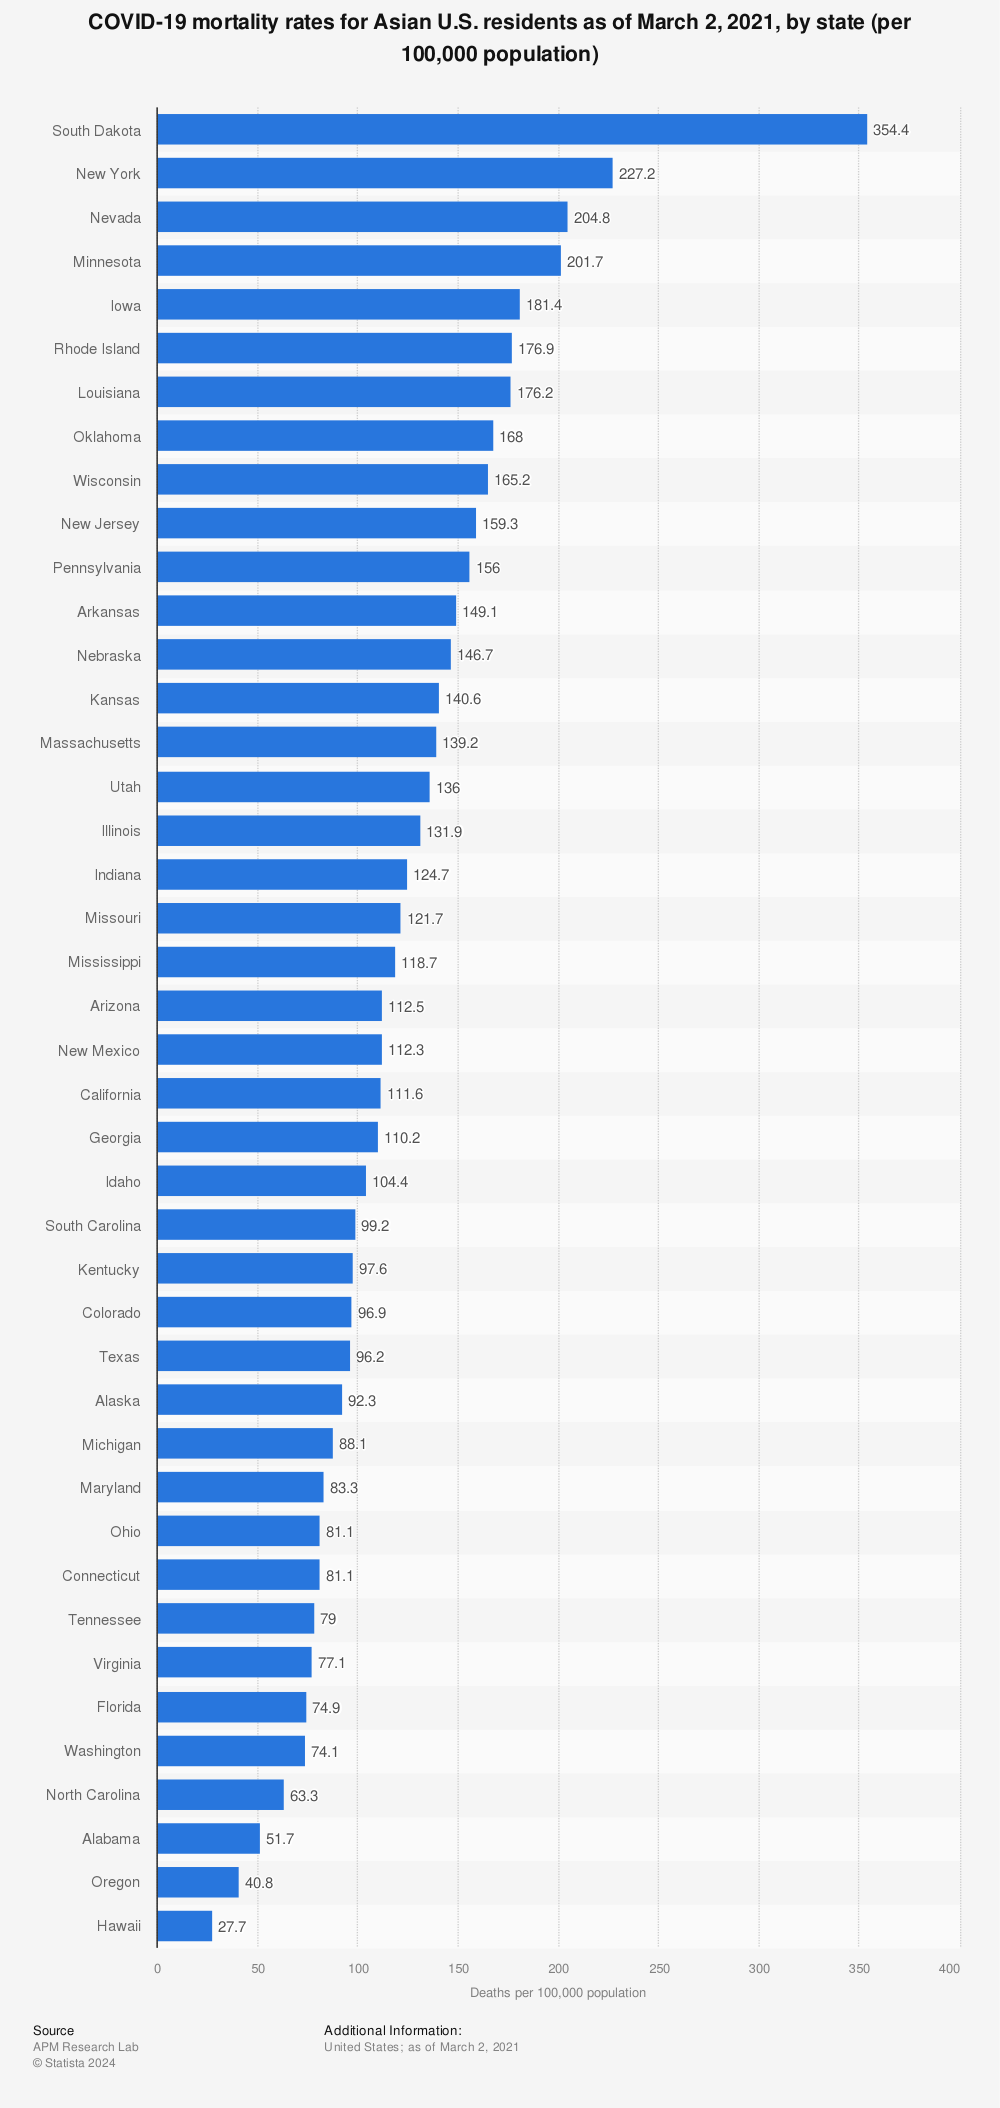 Statistic: COVID-19 mortality rates for Asian U.S. residents as of March 2, 2021, by state (per 100,000 population) | Statista